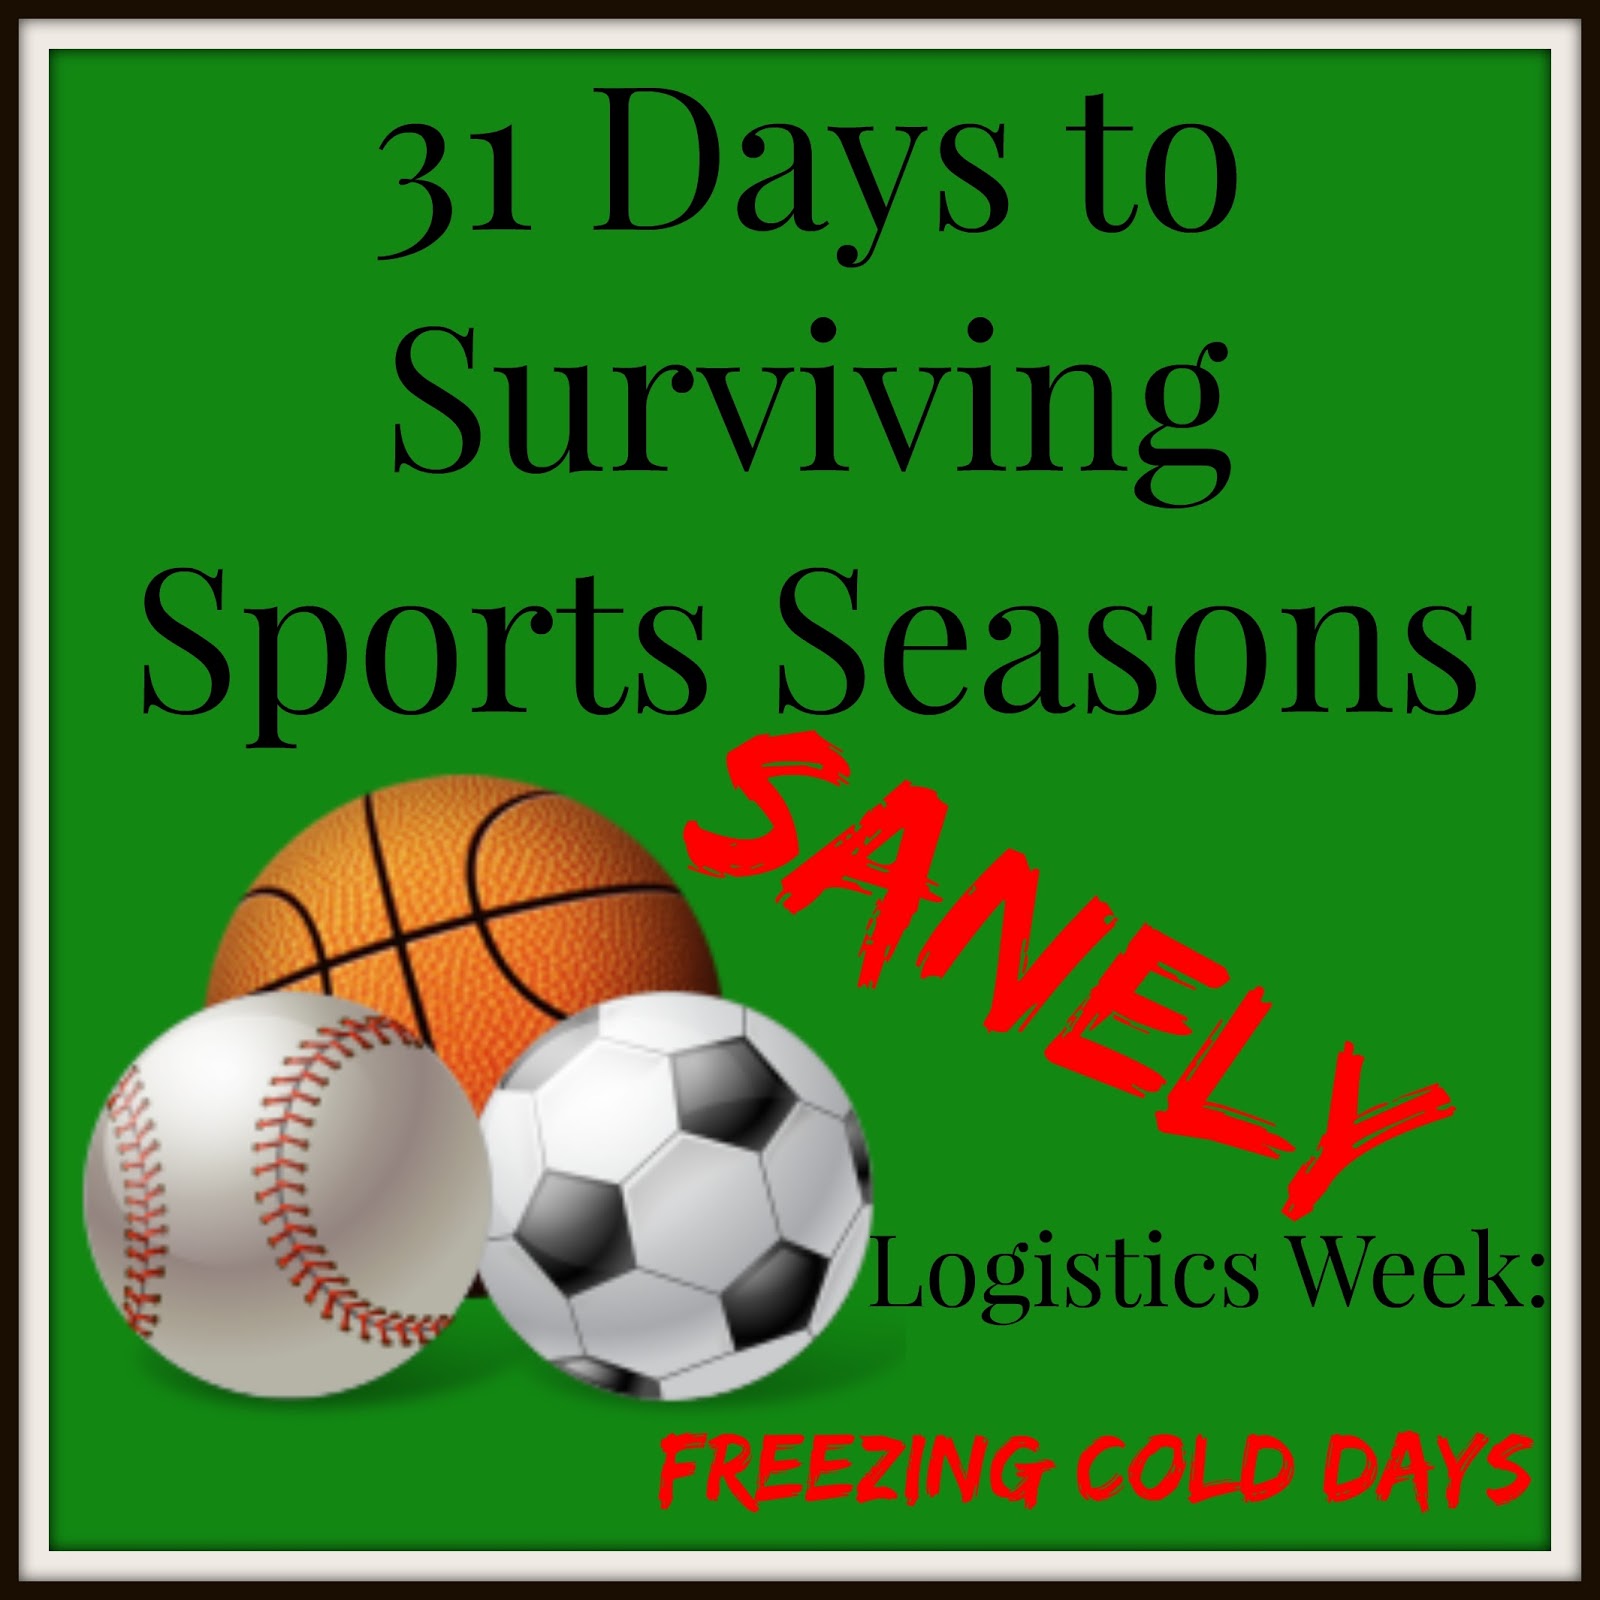 31 Days to Surviving Sports Seasons Sanely: Freezing Cold Days